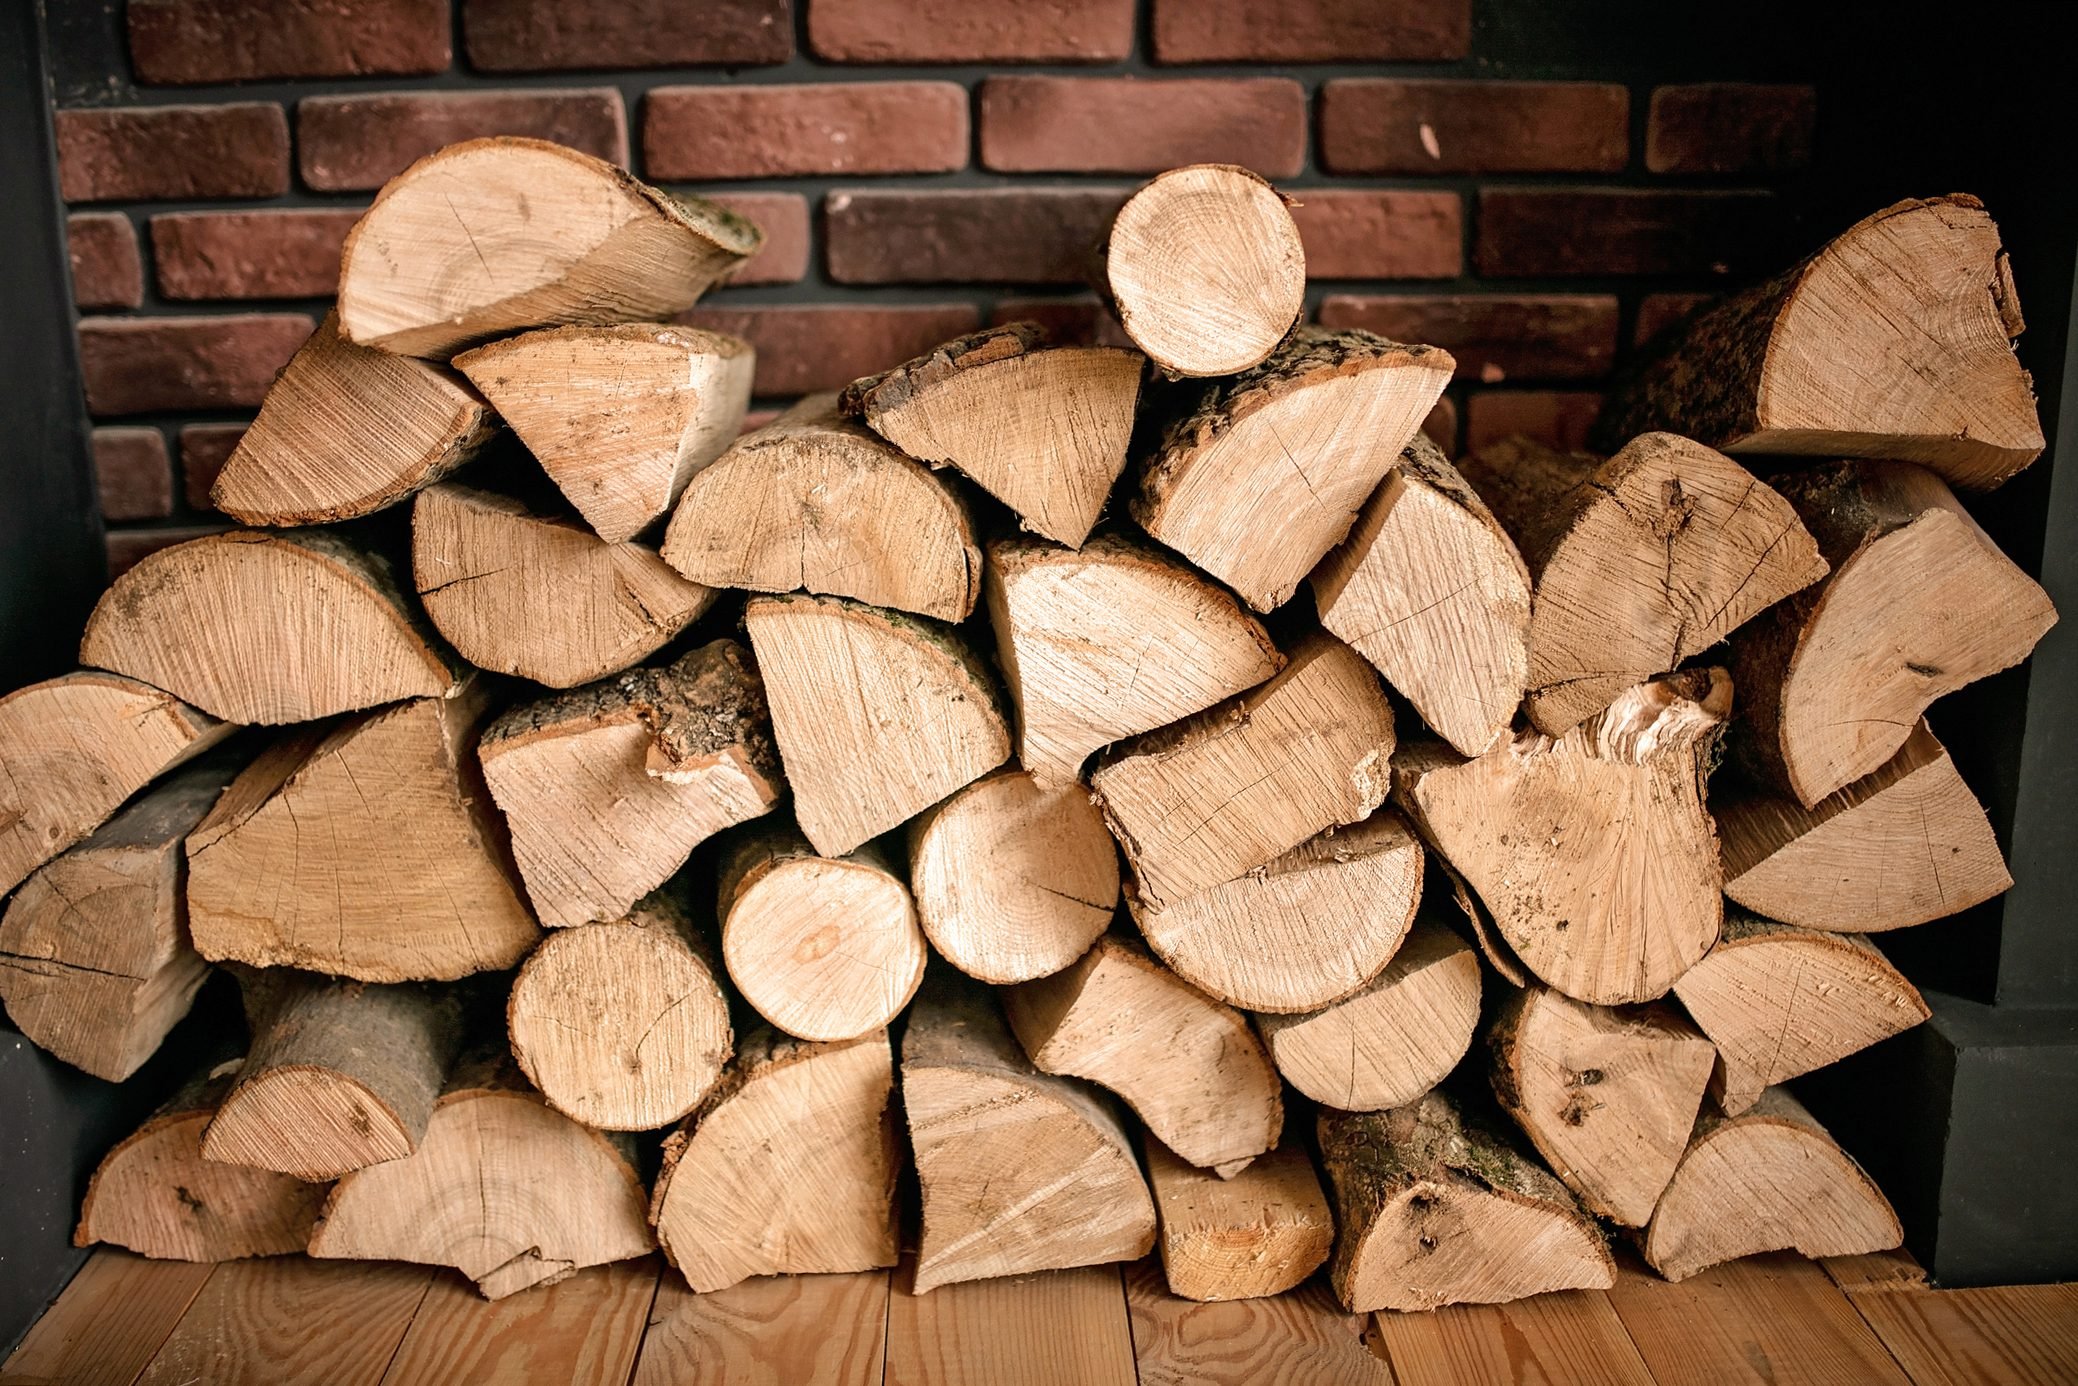 Hardwood vs. Softwood: Which Is Best for Firewood?